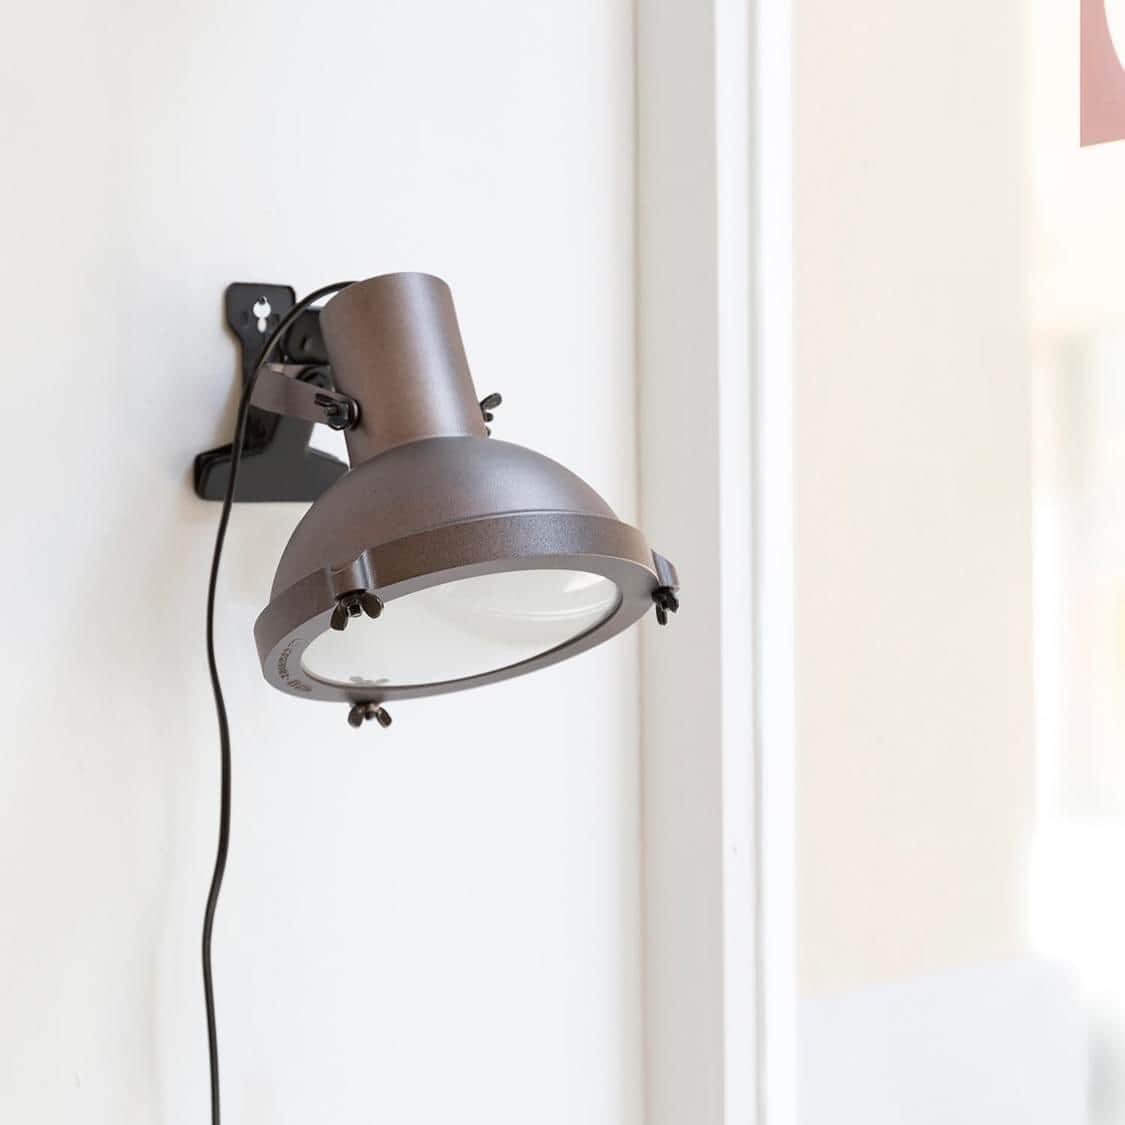 Load image into Gallery viewer, Pincer Clip Lamp - Projecteur 165 Pincer Clip by Le Corbusier
